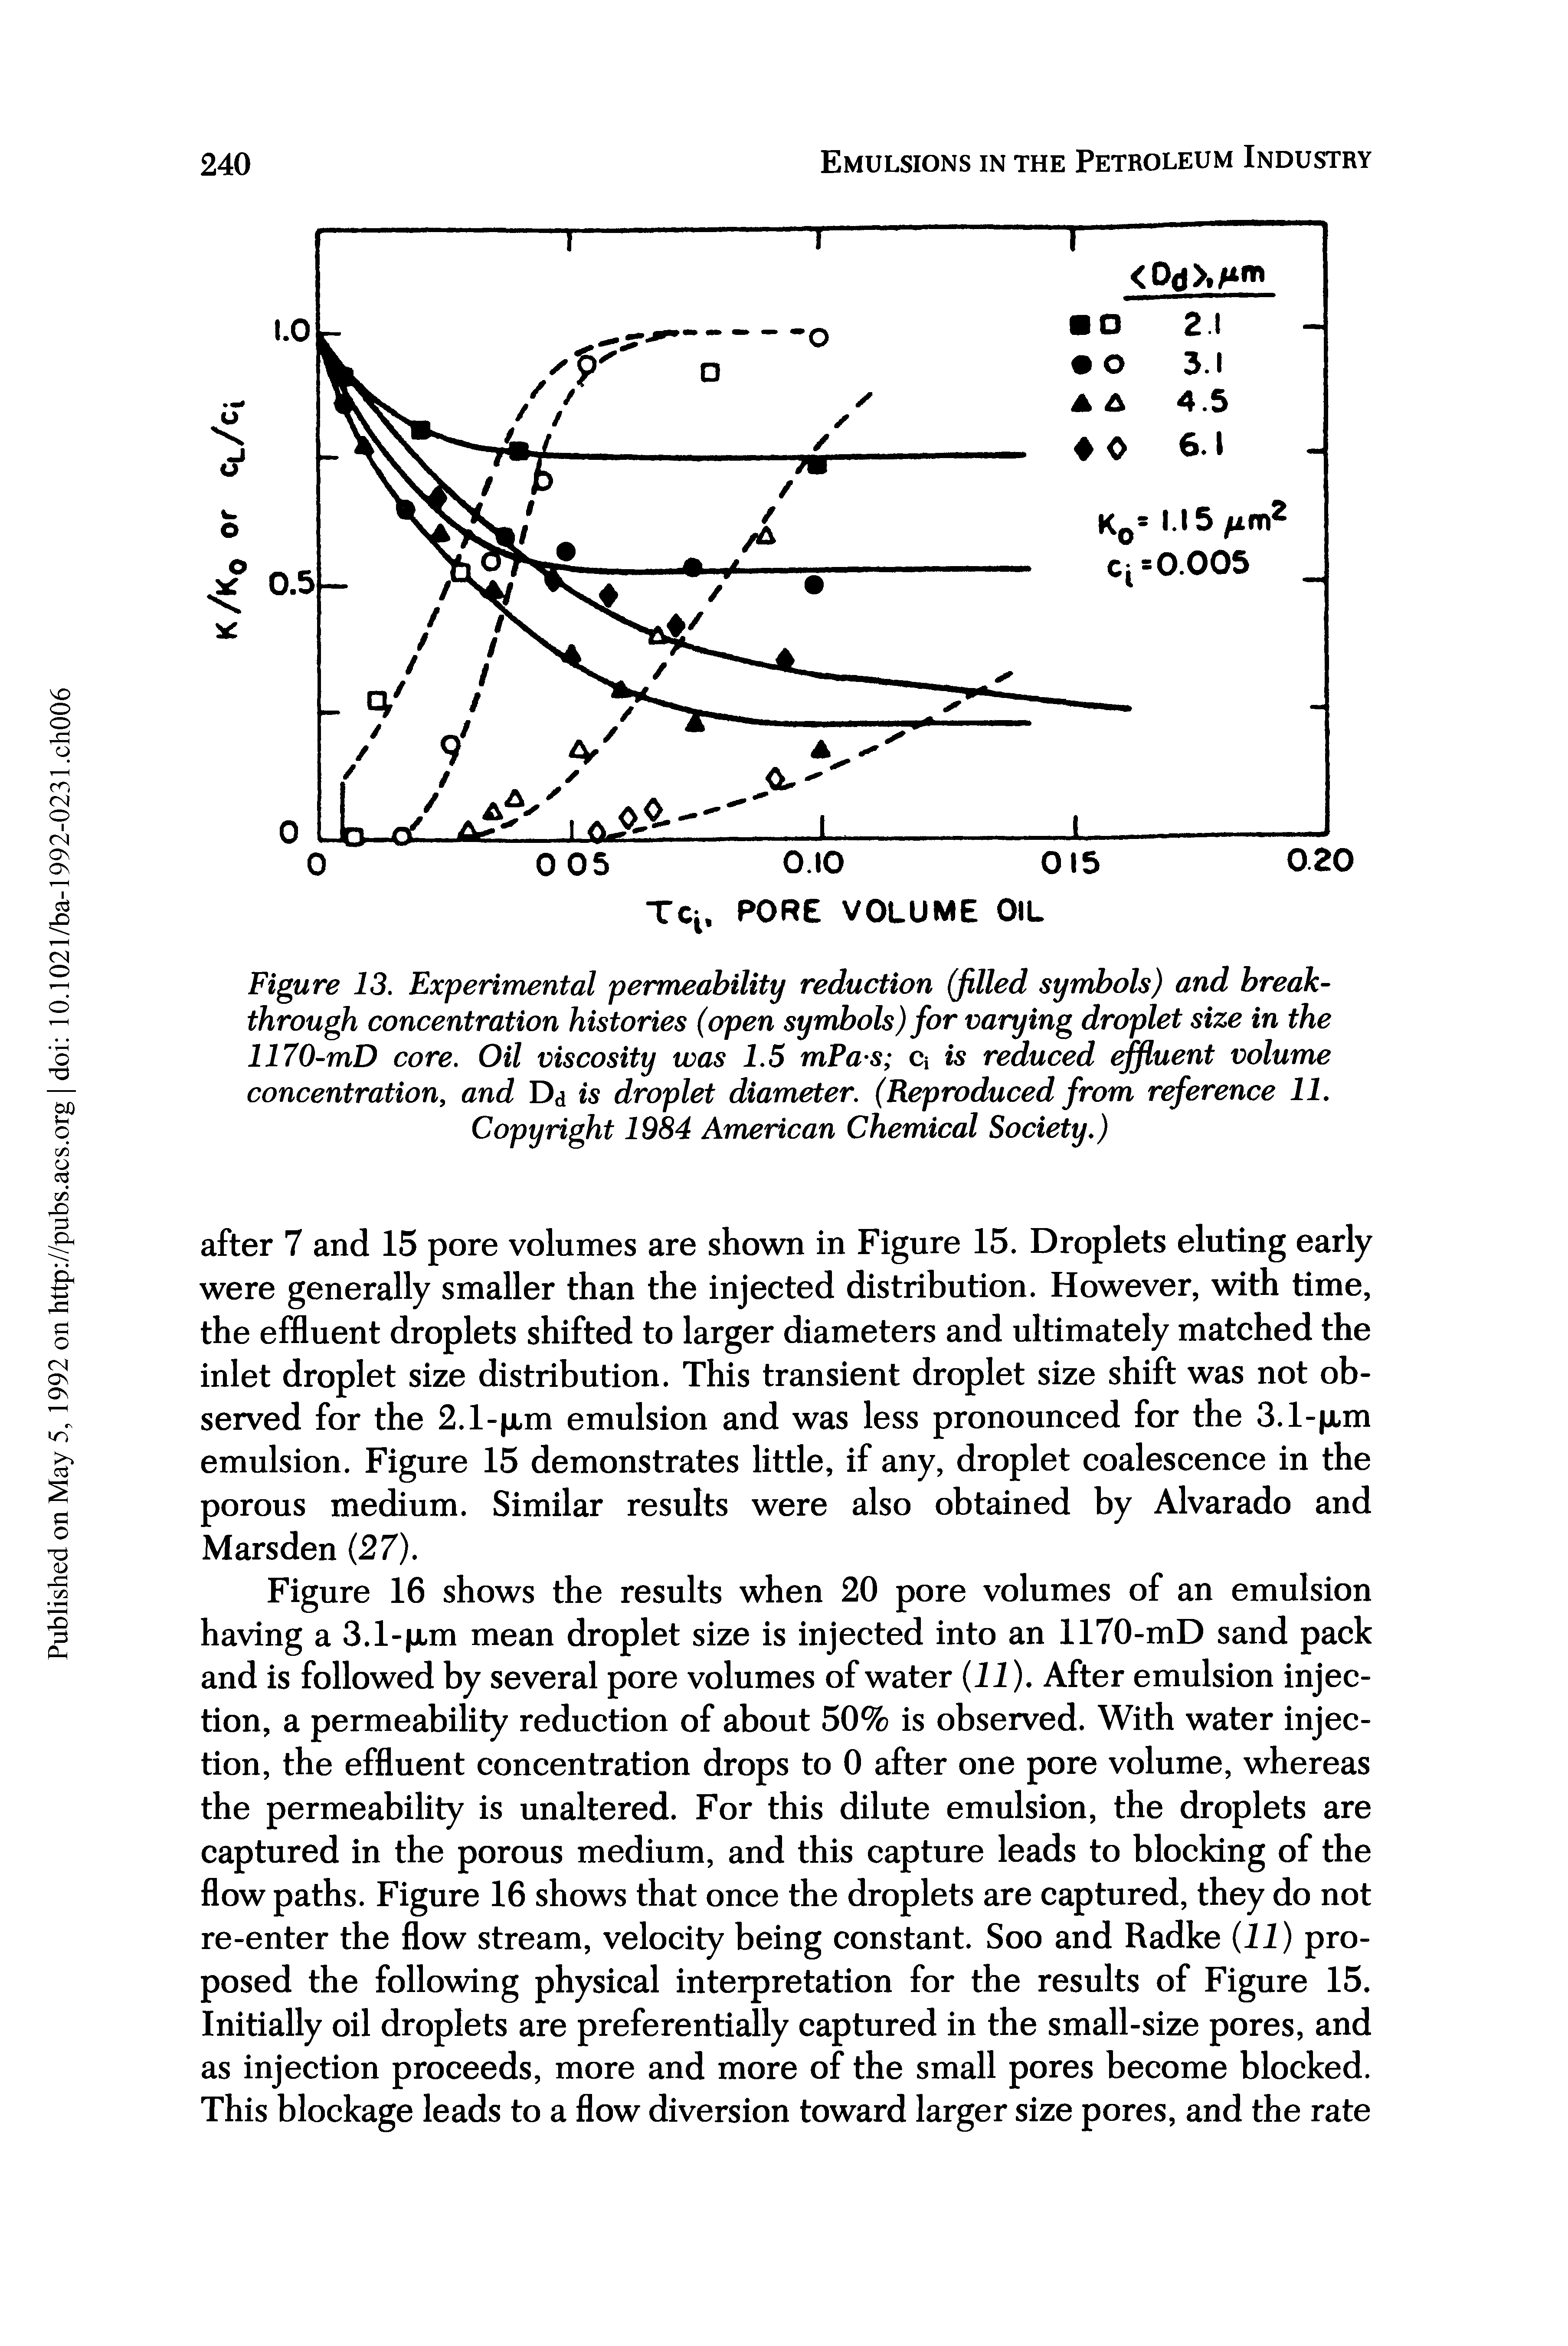 Figure 16 shows the results when 20 pore volumes of an emulsion having a 3.1- xm mean droplet size is injected into an 1170-mD sand pack and is followed by several pore volumes of water (ii). After emulsion injection, a permeability reduction of about 50% is observed. With water injection, the effluent concentration drops to 0 after one pore volume, whereas the permeability is unaltered. For this dilute emulsion, the droplets are captured in the porous medium, and this capture leads to blocking of the flow paths. Figure 16 shows that once the droplets are captured, they do not re-enter the flow stream, velocity being constant. Soo and Radke (ii) proposed the following physical interpretation for the results of Figure 15. Initially oil droplets are preferentially captured in the small-size pores, and as injection proceeds, more and more of the small pores become blocked. This blockage leads to a flow diversion toward larger size pores, and the rate...